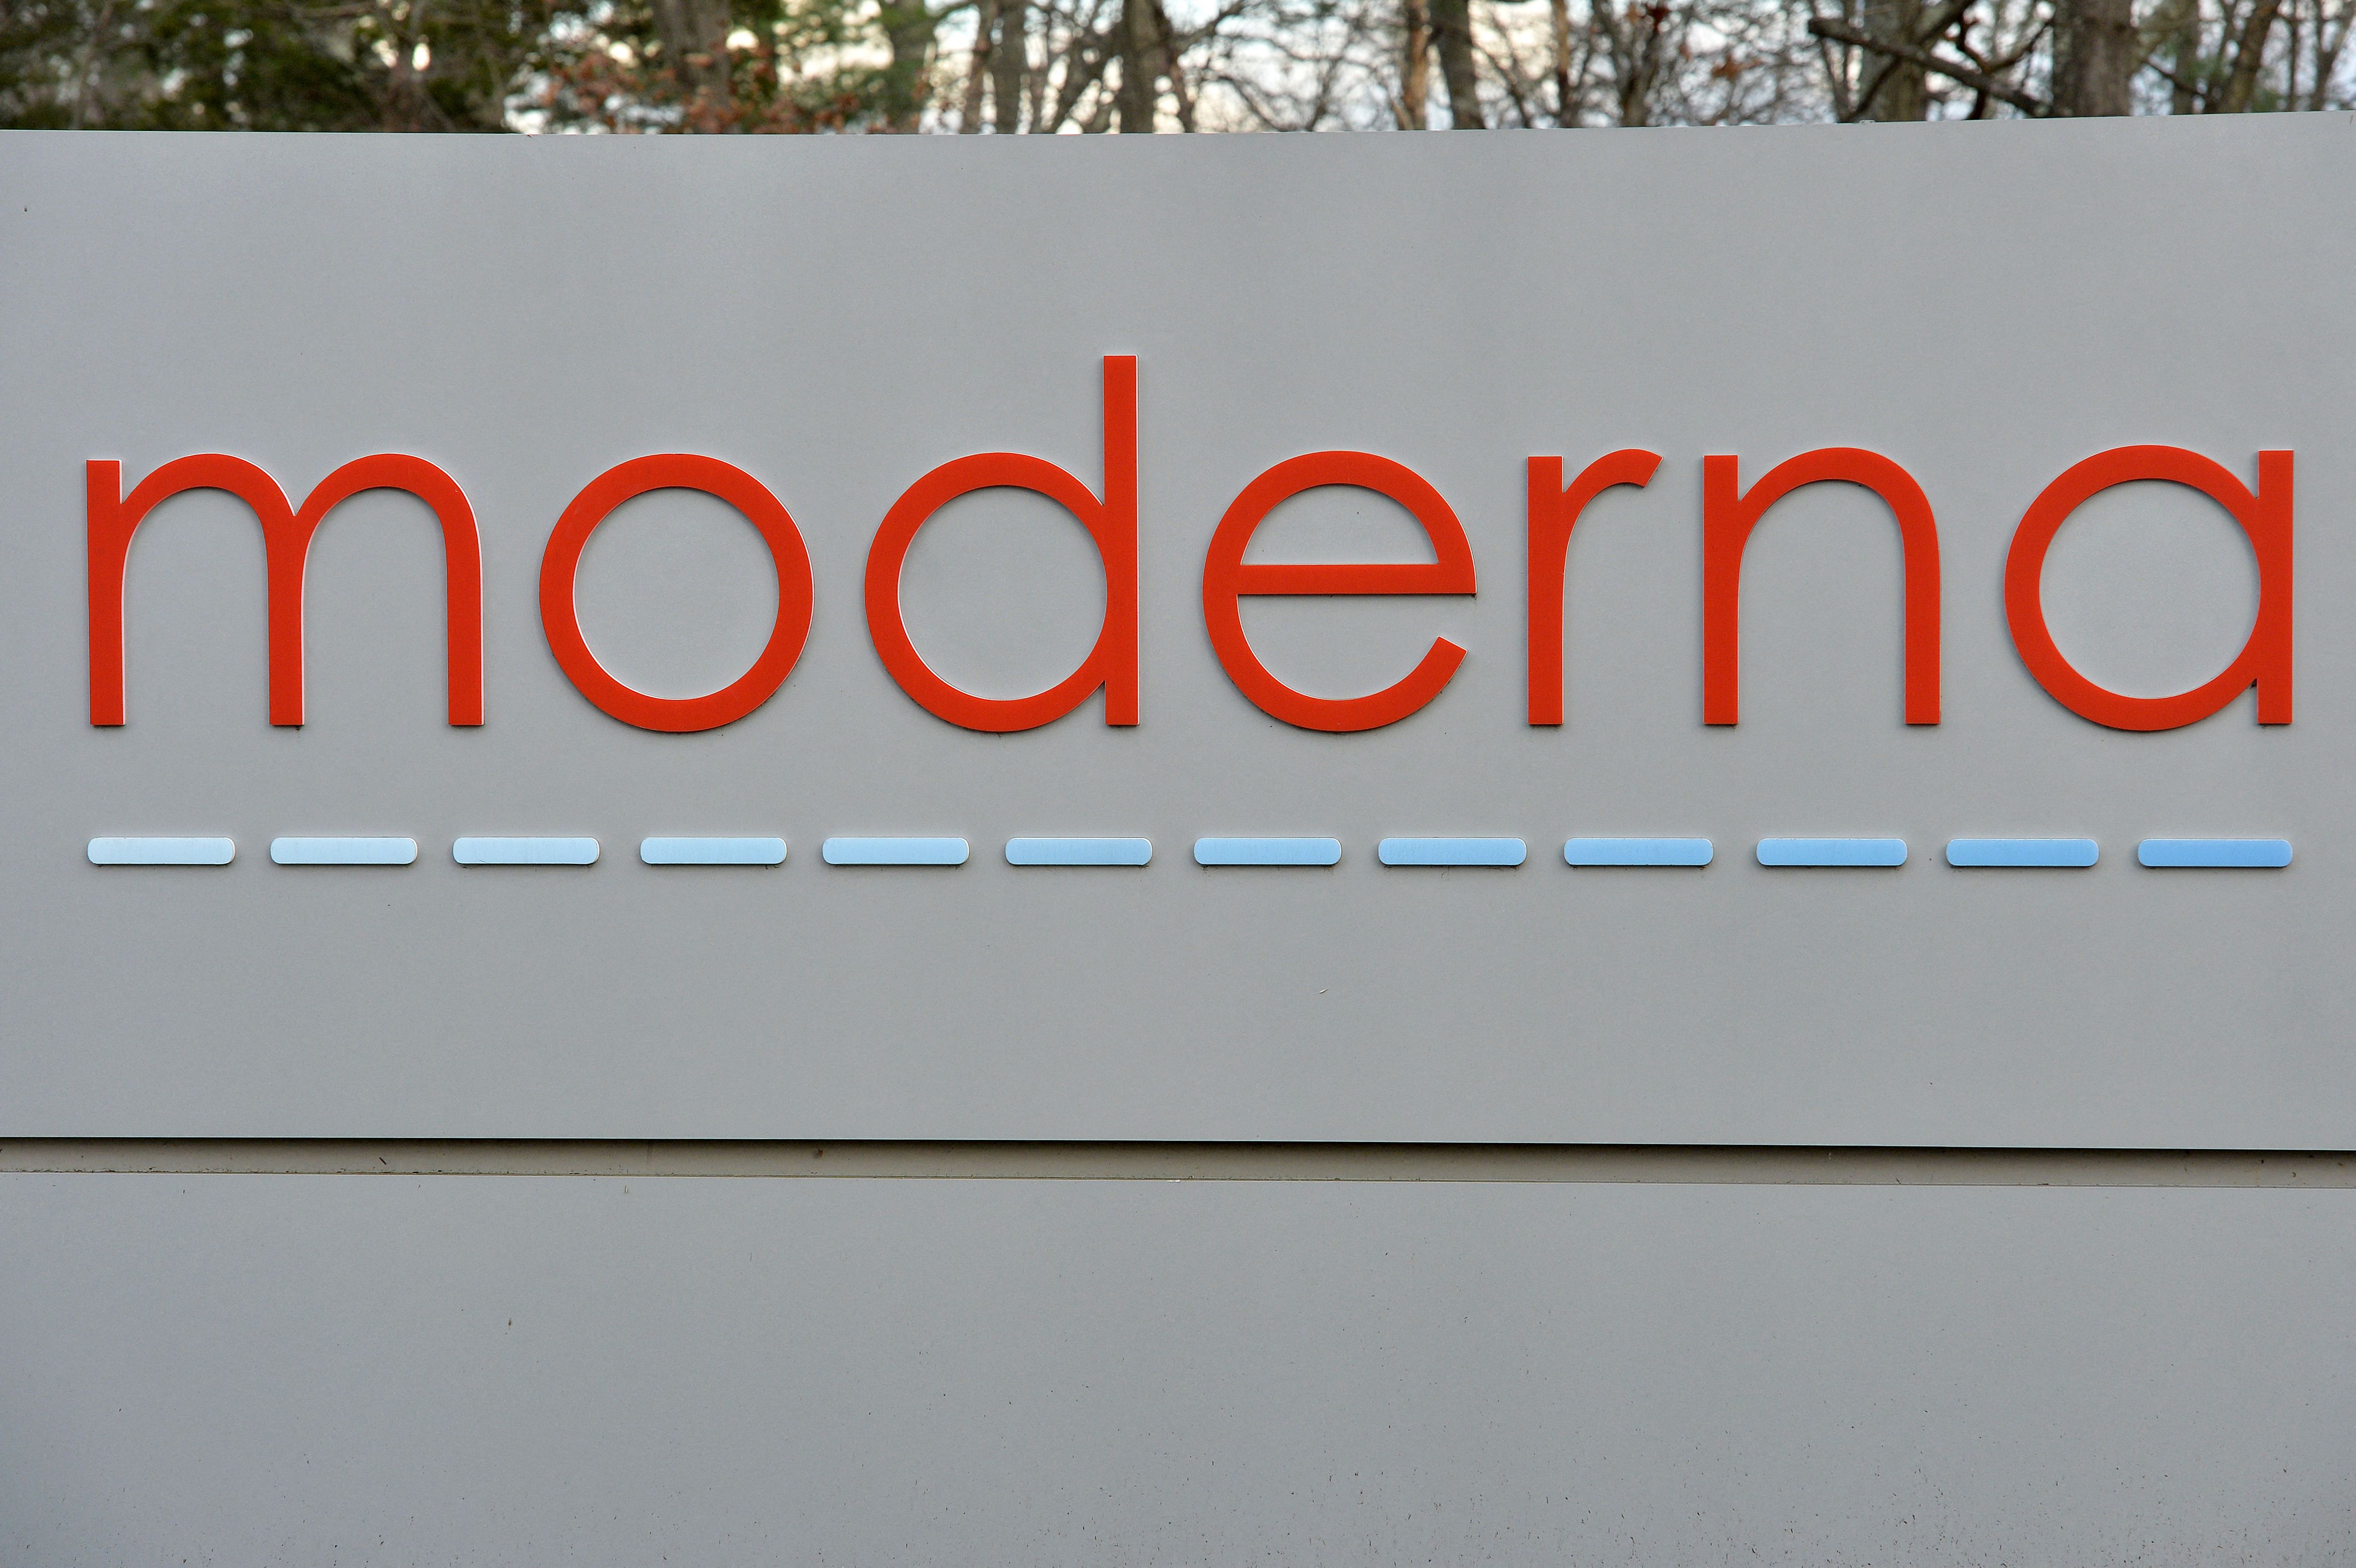 Moderna asks the US regulator for authorization for a second booster dose